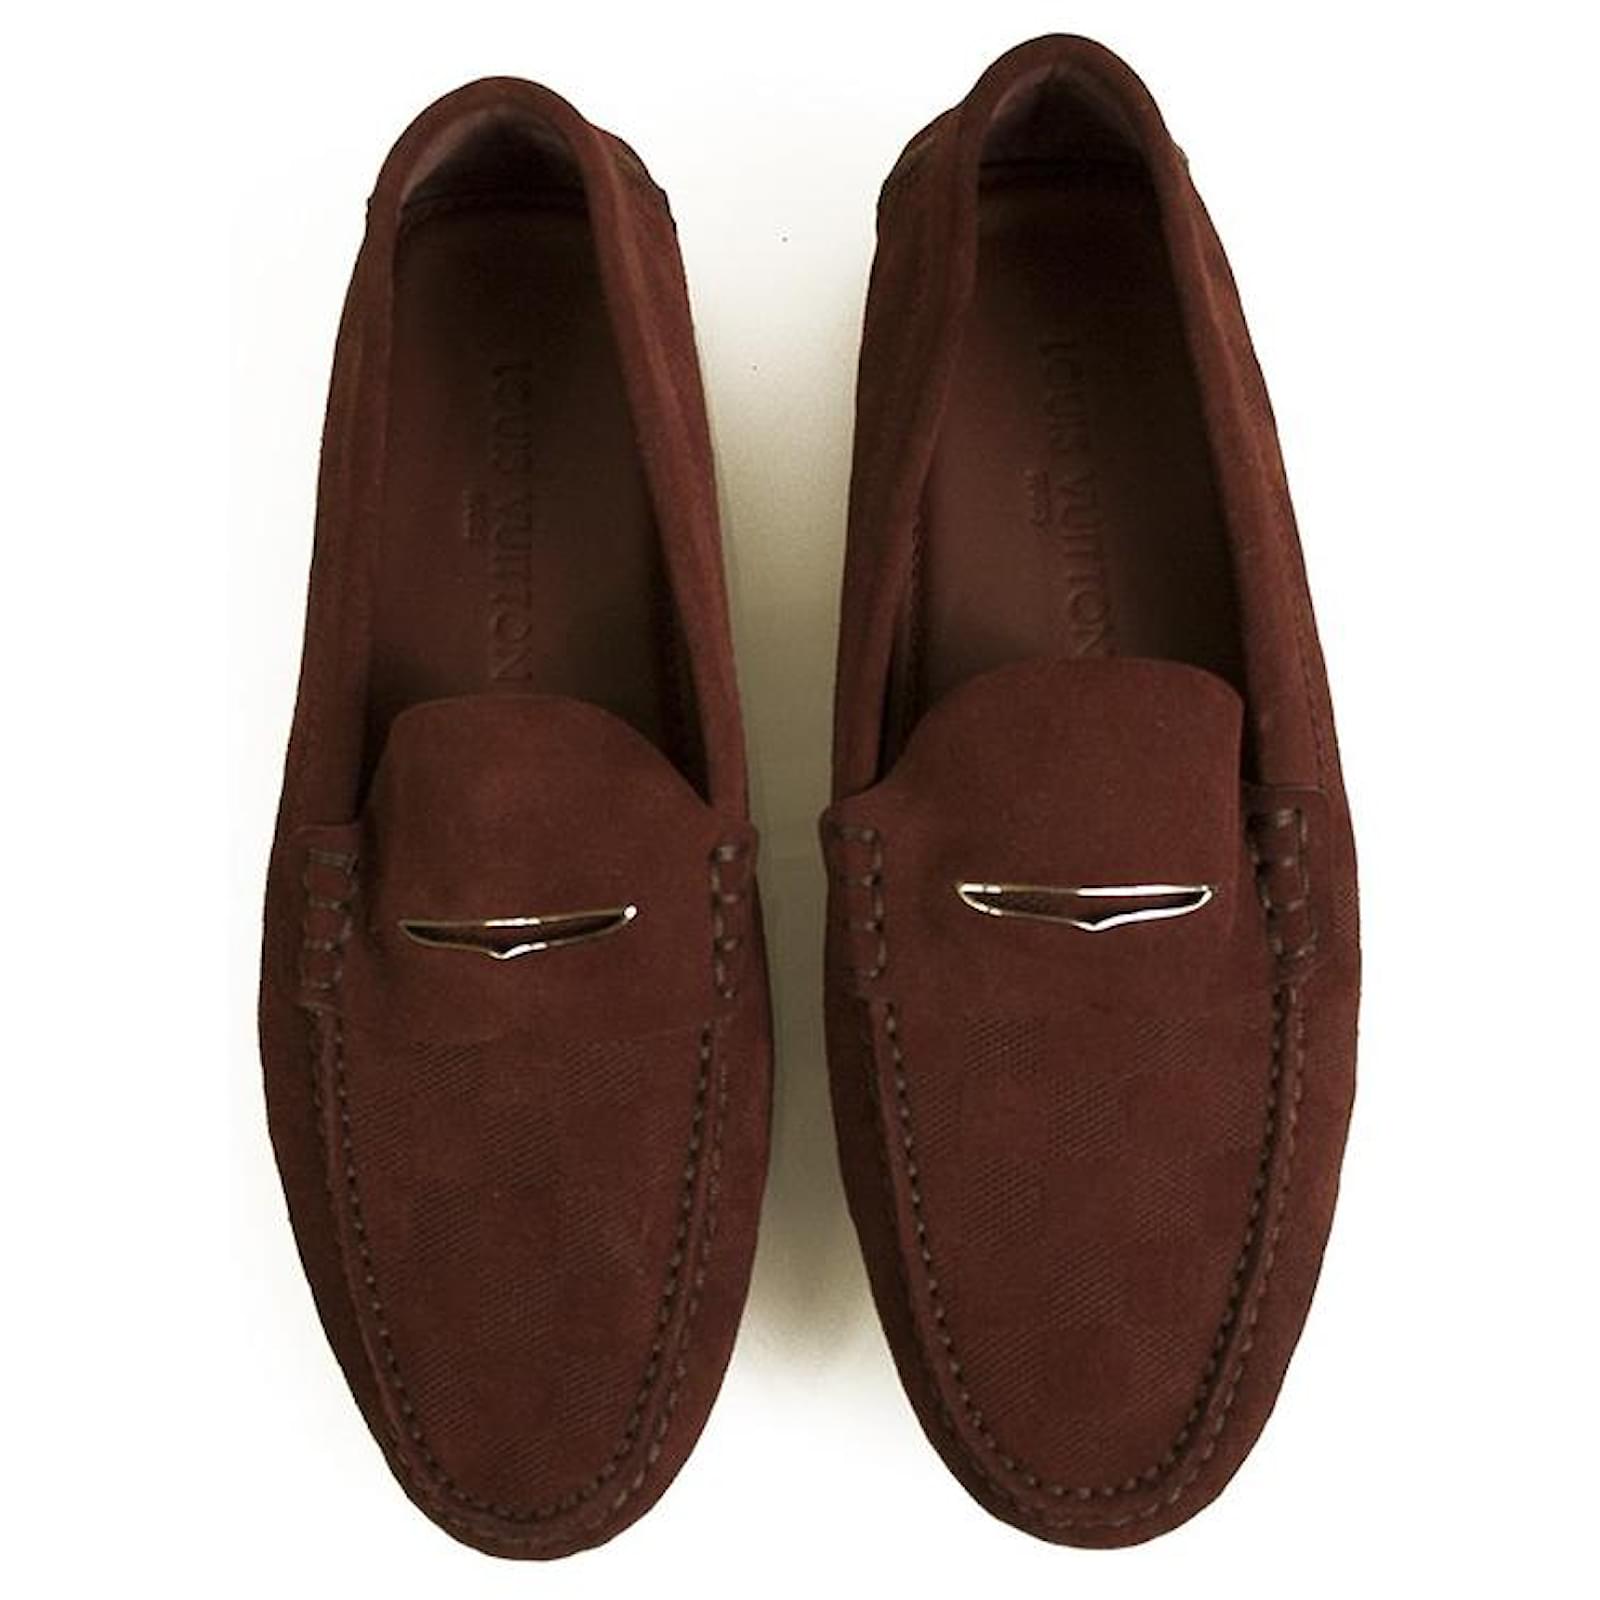 Louis Vuitton, Shoes, Louis Vuitton Mens Burgundy Red Maroon Leather Major  Dress Loafers Lv85 Us 95